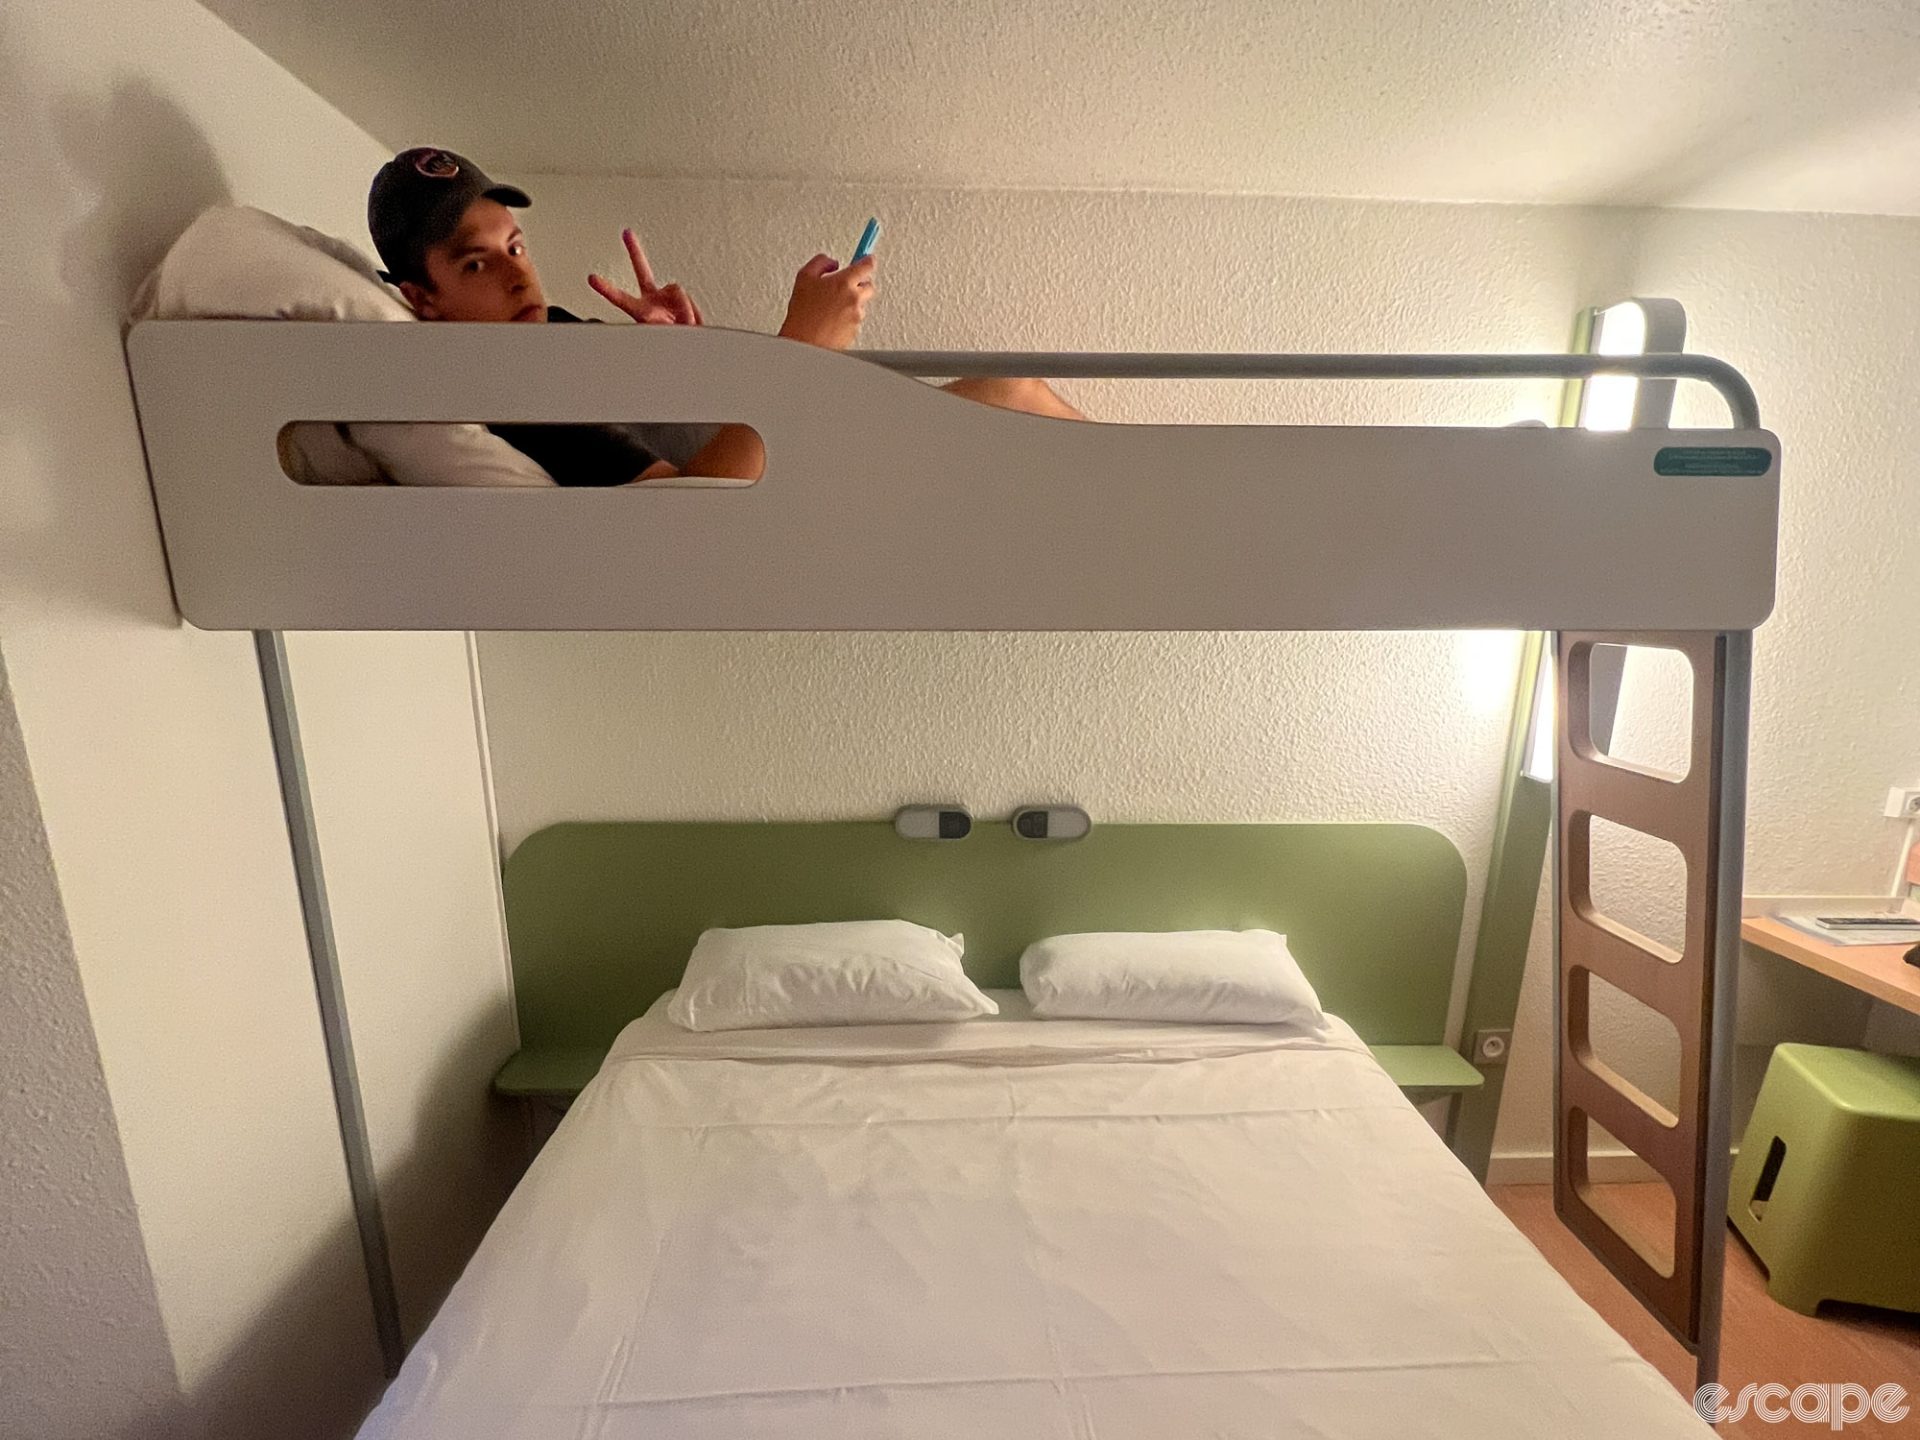 A large man in a small bunk bed gives the V sign. He looks positively thrilled to be staying in a budget hotel.